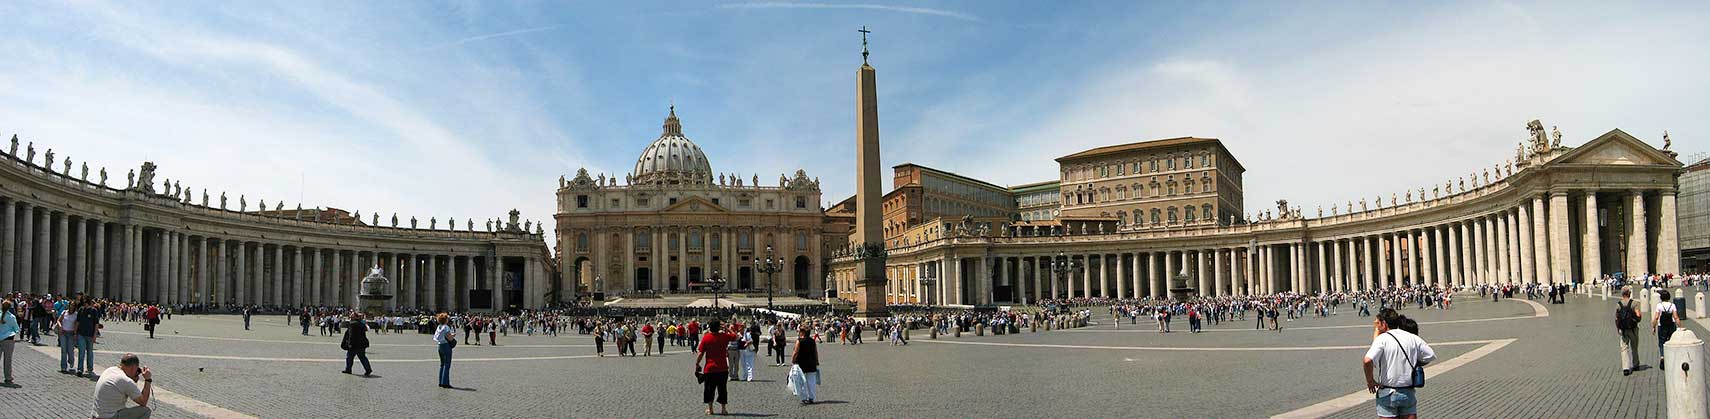 Panorama of St Peter's Square in Vatican City